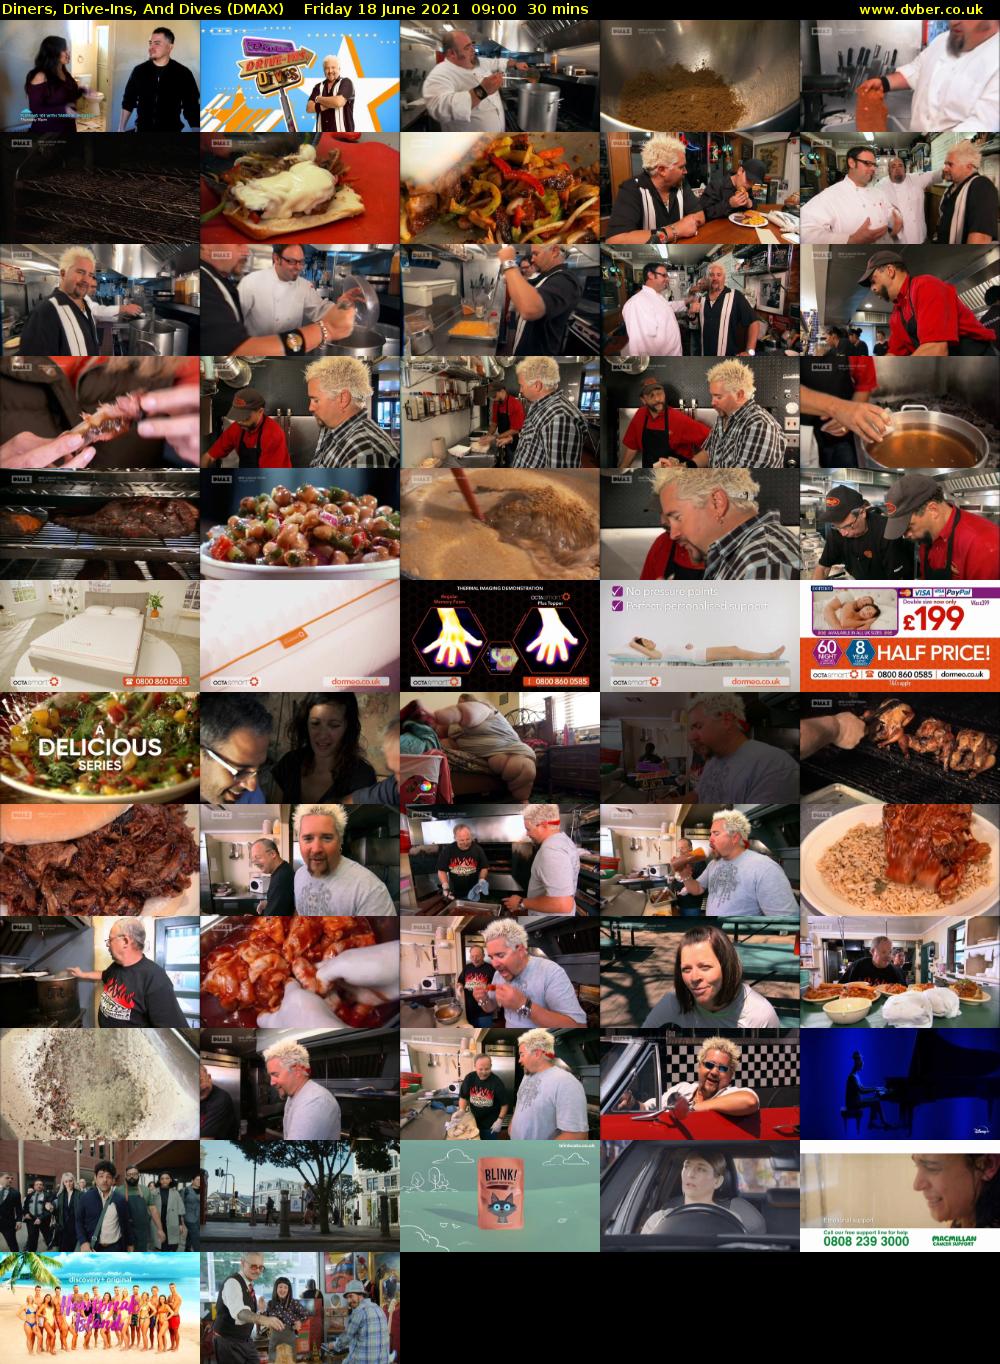 Diners, Drive-Ins, And Dives (DMAX) Friday 18 June 2021 09:00 - 09:30